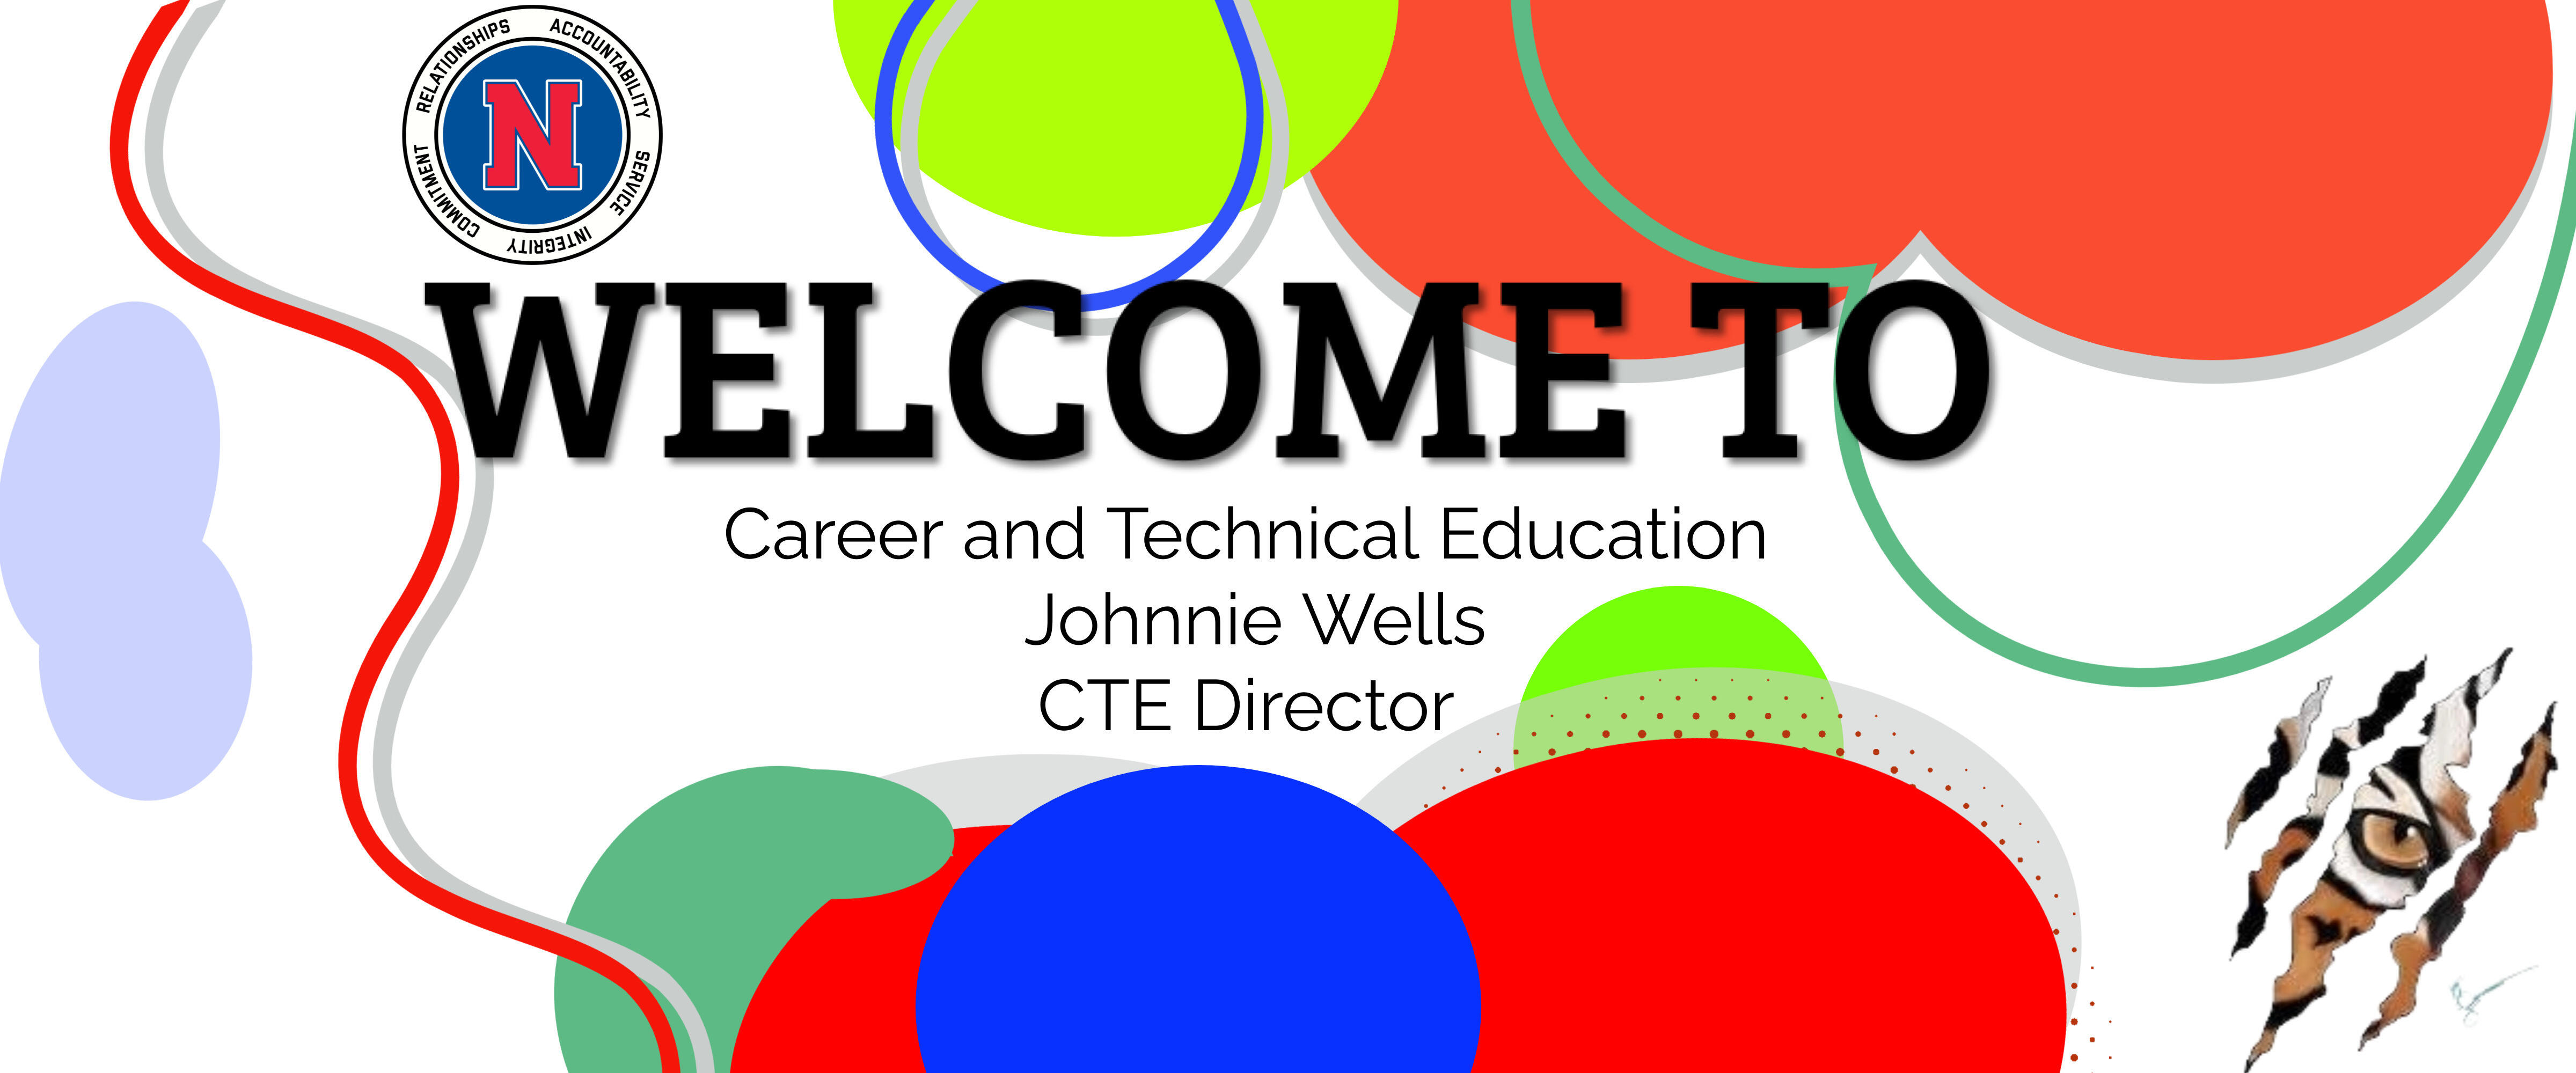 Welcome to our Career and Technical Education page